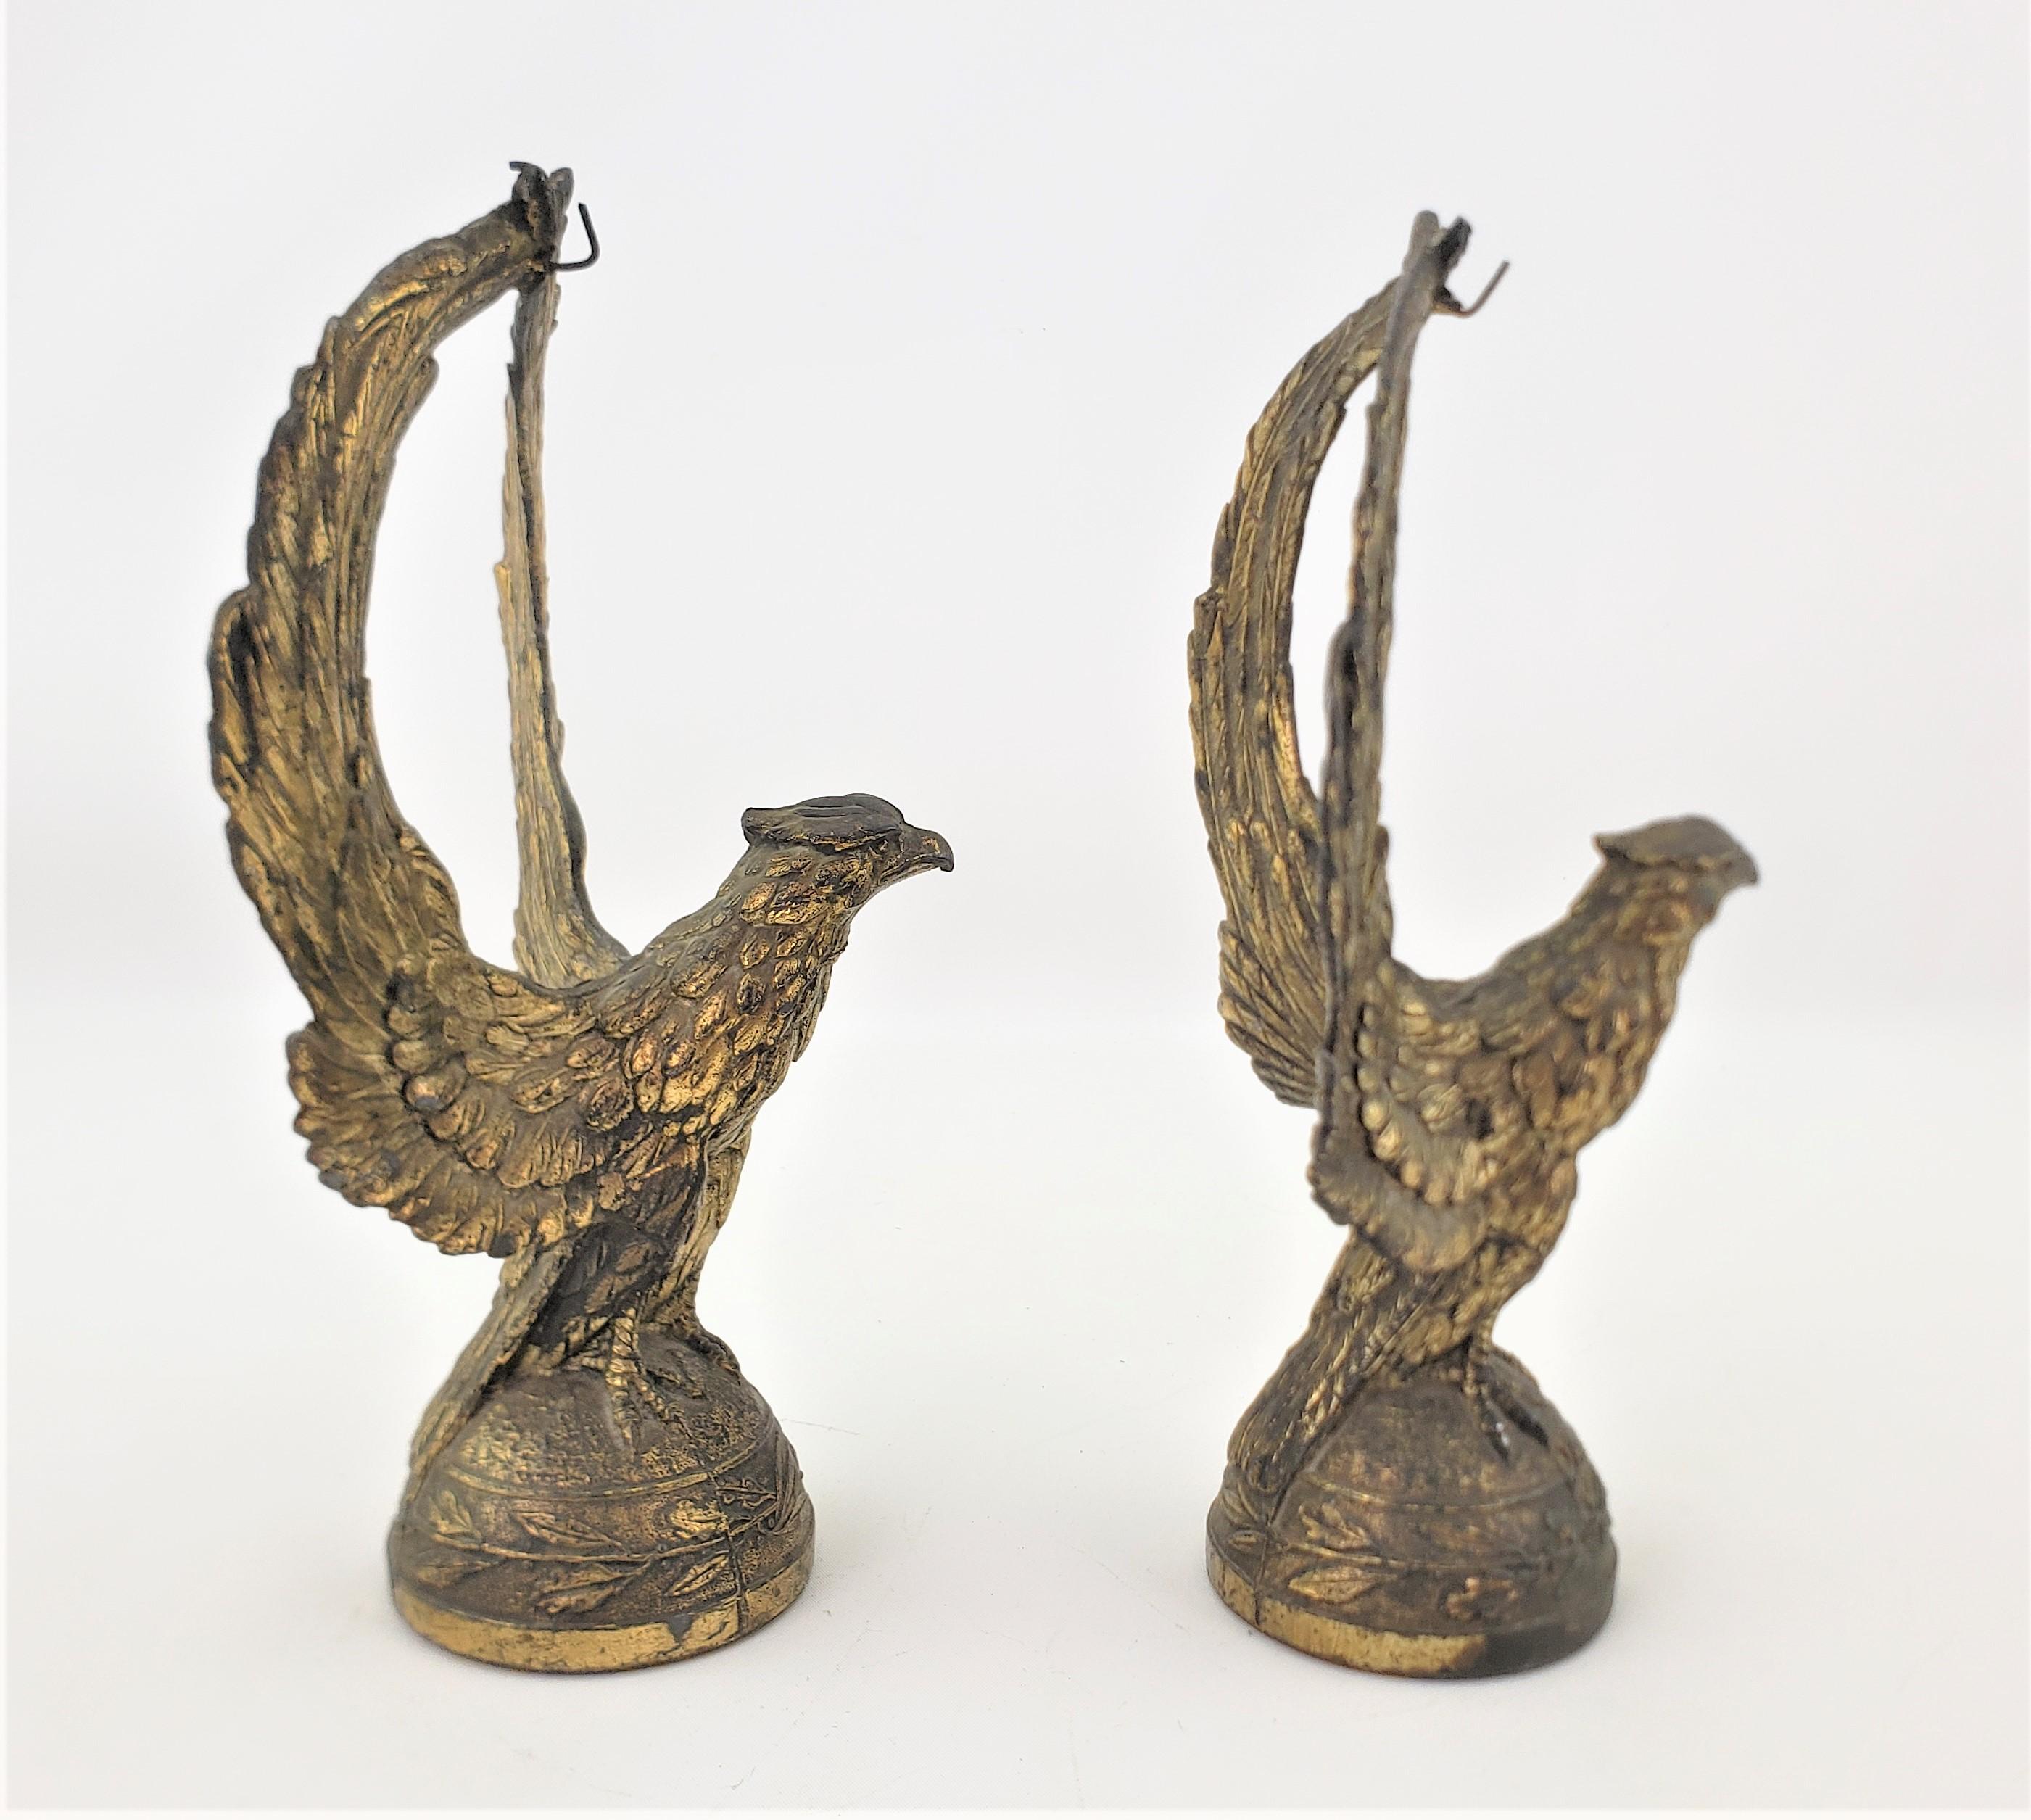 Edwardian Pair of Antique Brass Plated Figural Bald Eagle Pocket Watch Stands or Bookends For Sale